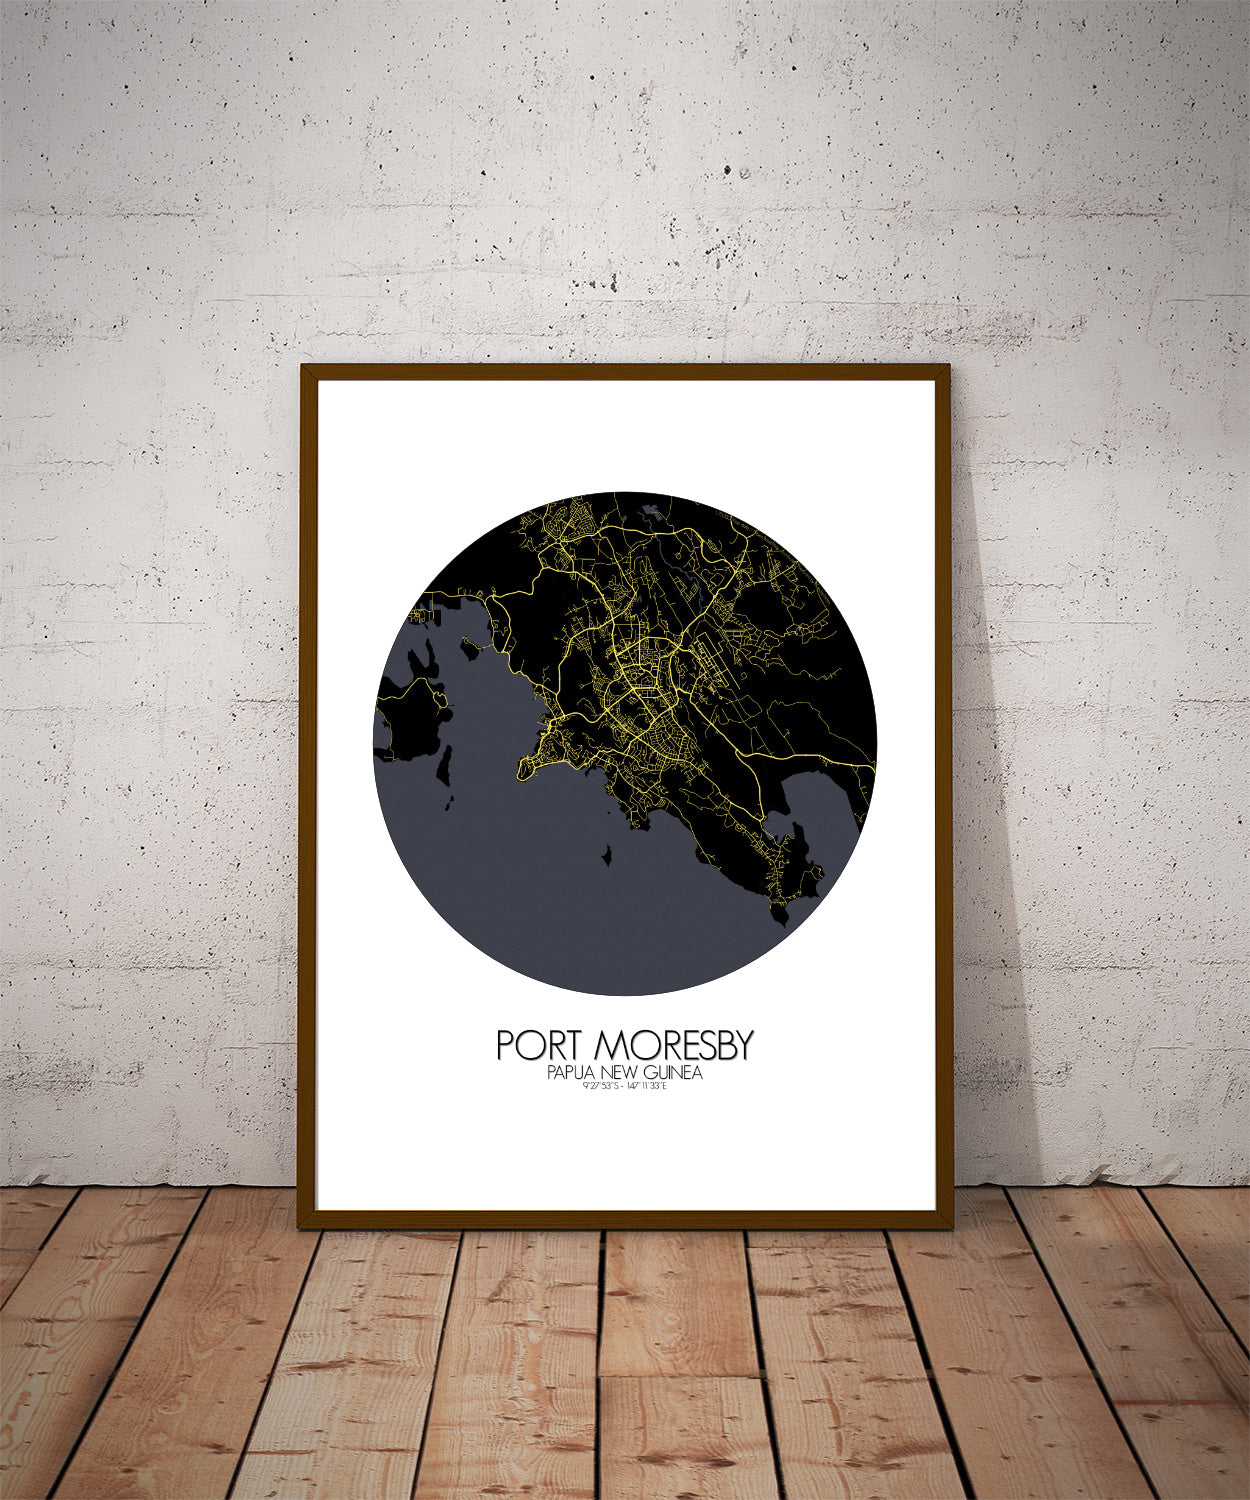 Port Moresby Night round shape design poster city map